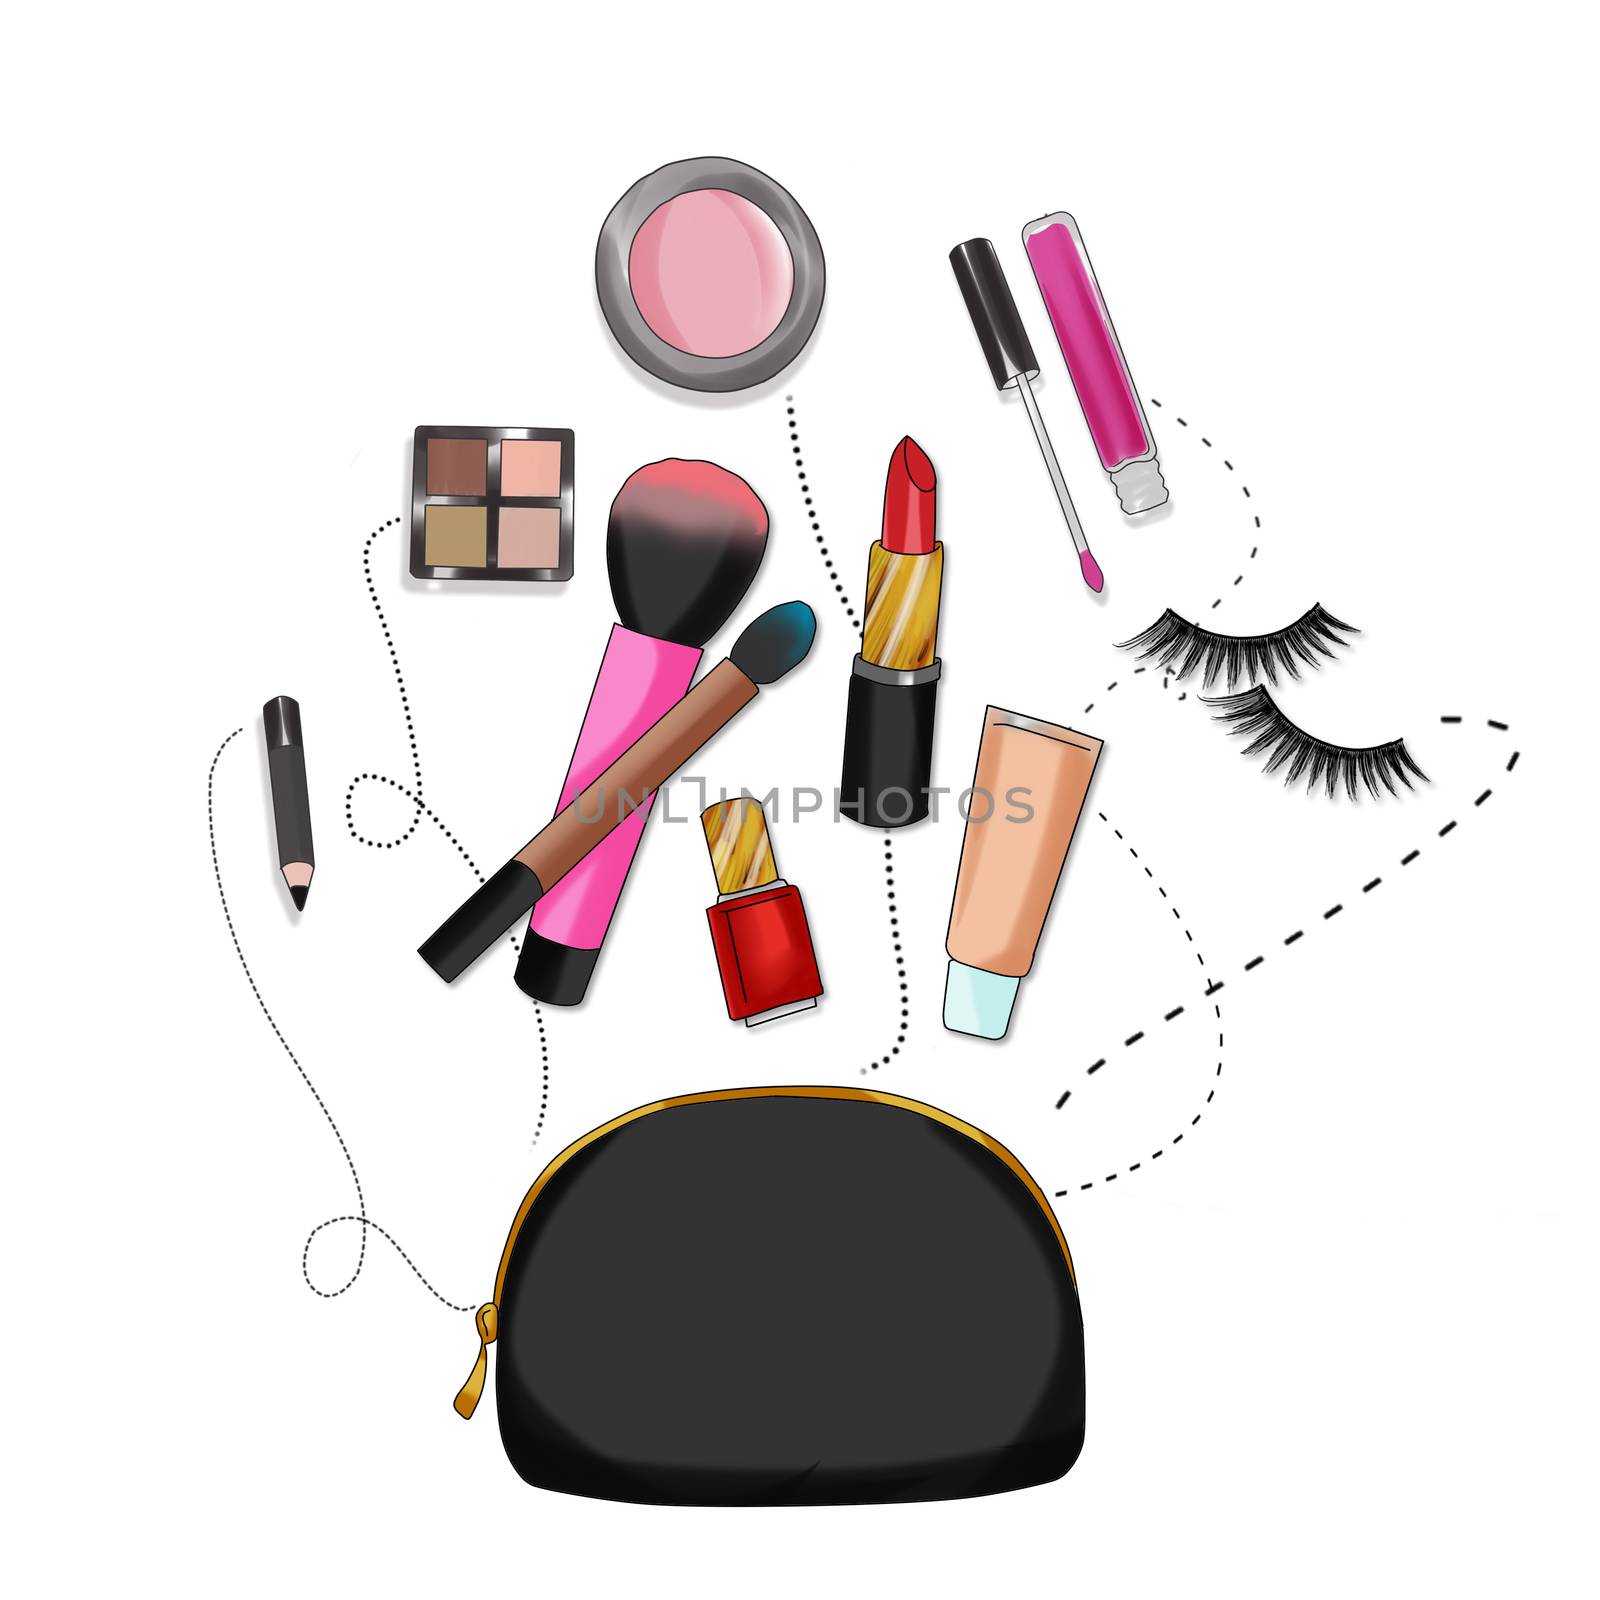 Fashion Illustration background - Beauty bag with make up and cosmetics by GGillustrations